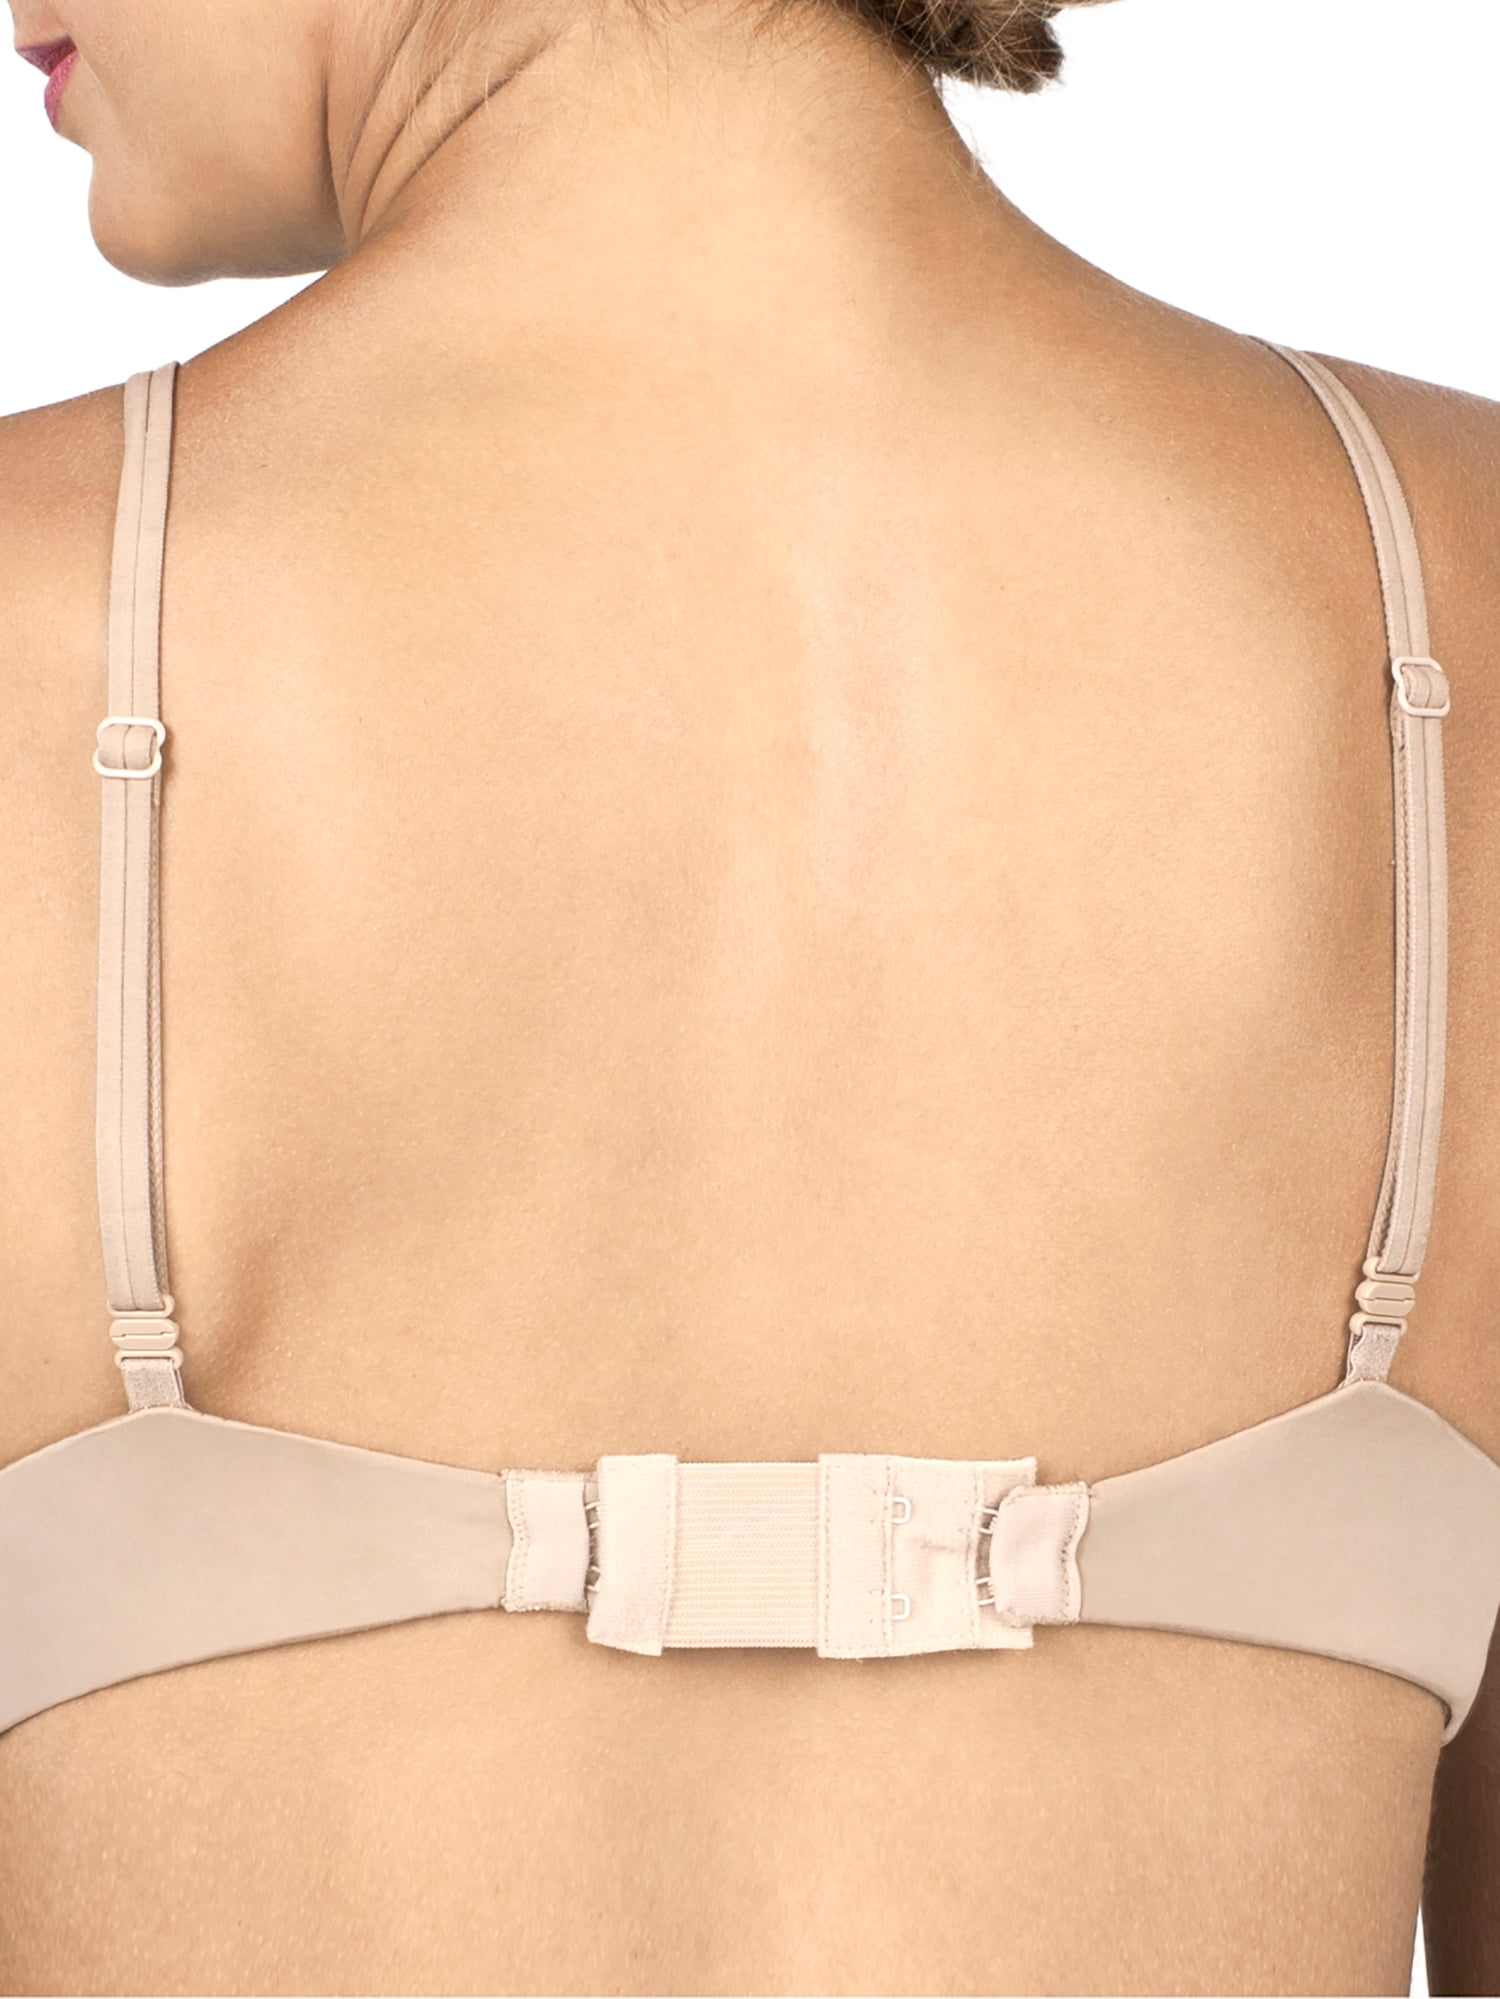 Bra Extender 3 Rows 3 Hooks Lady Extension Polyester Strap Underwear Buckle C2A 